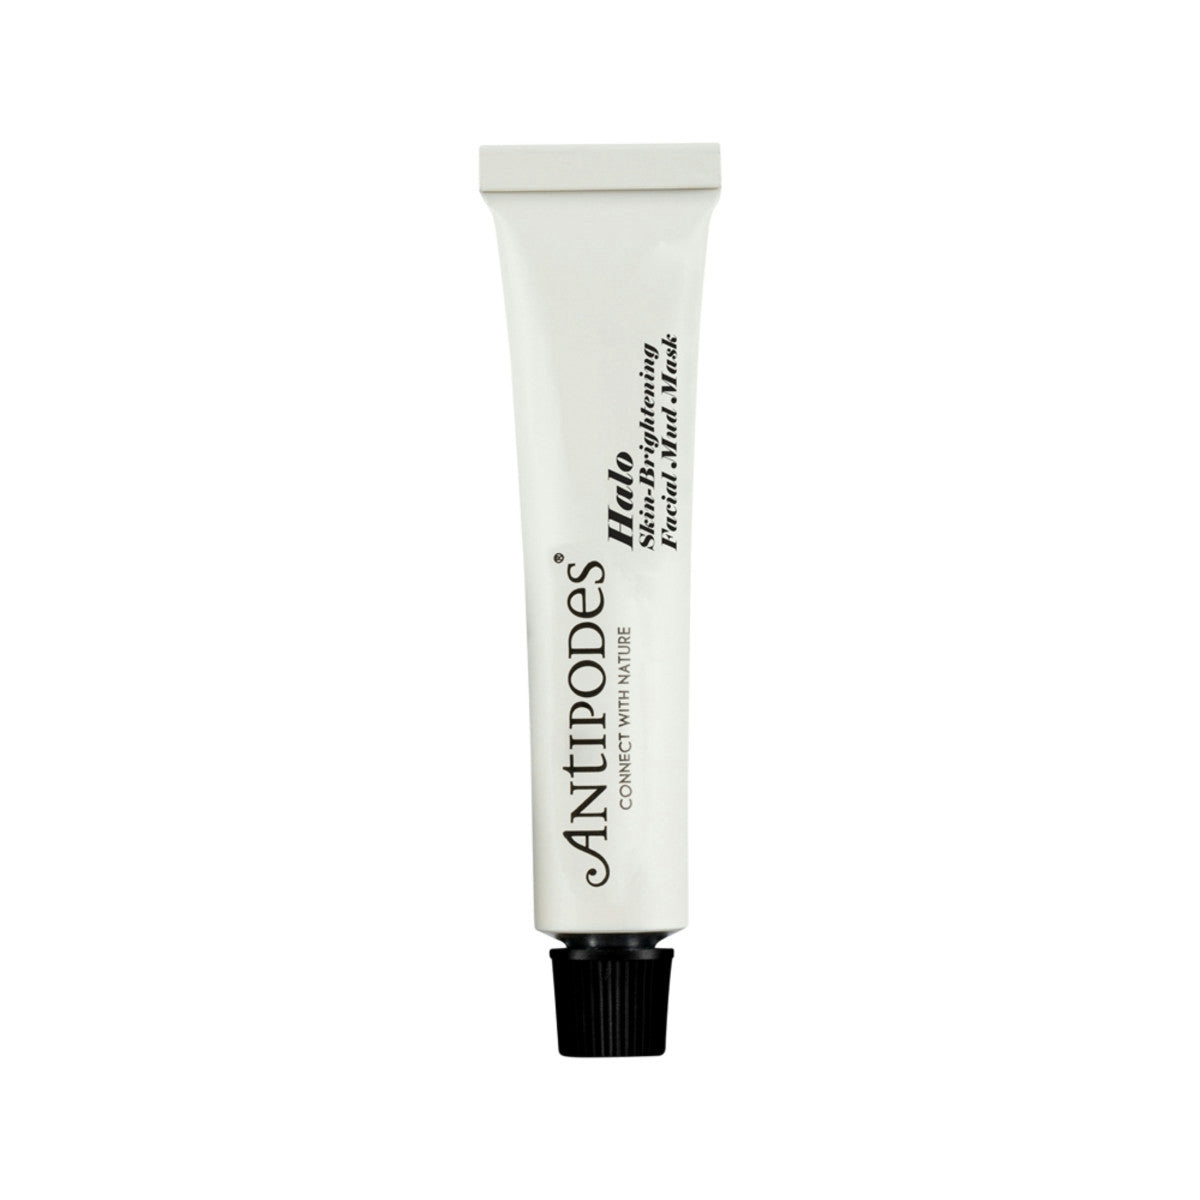 image of Antipodes Halo Skin-Brightening Facial Mud Mask 15ml on white background 